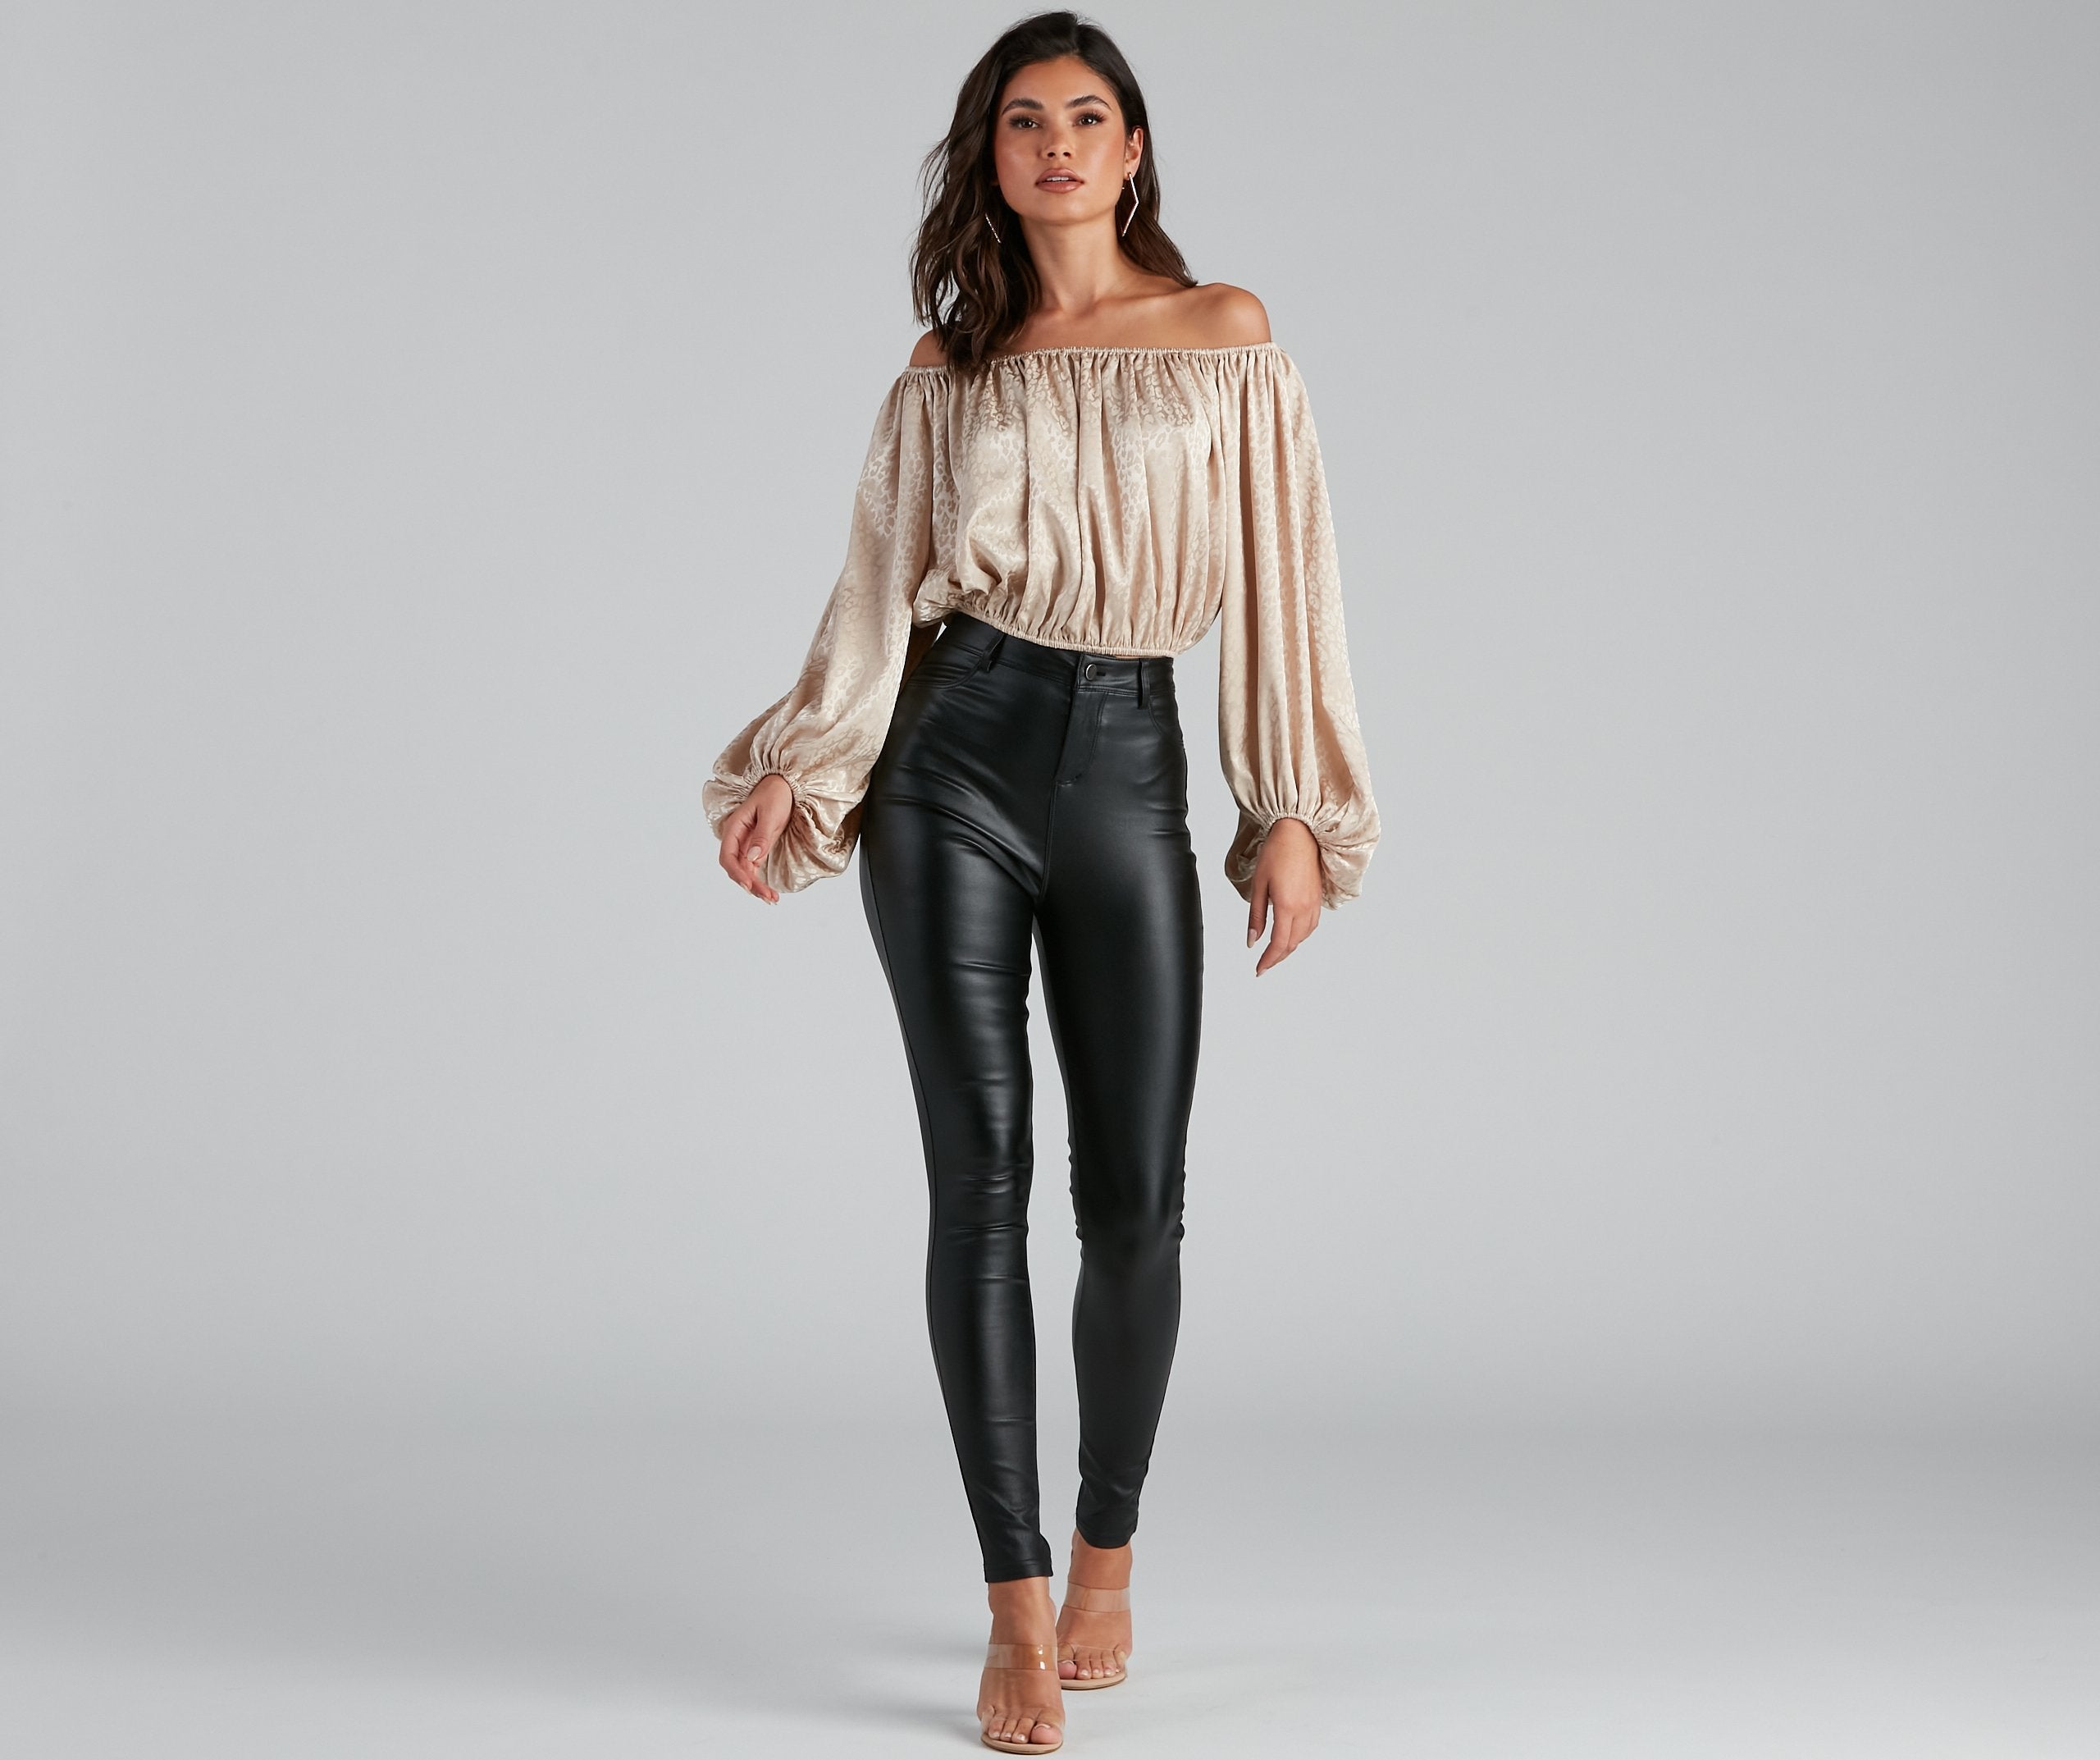 On The Prowl Satin Leopard Blouse - Lady Occasions